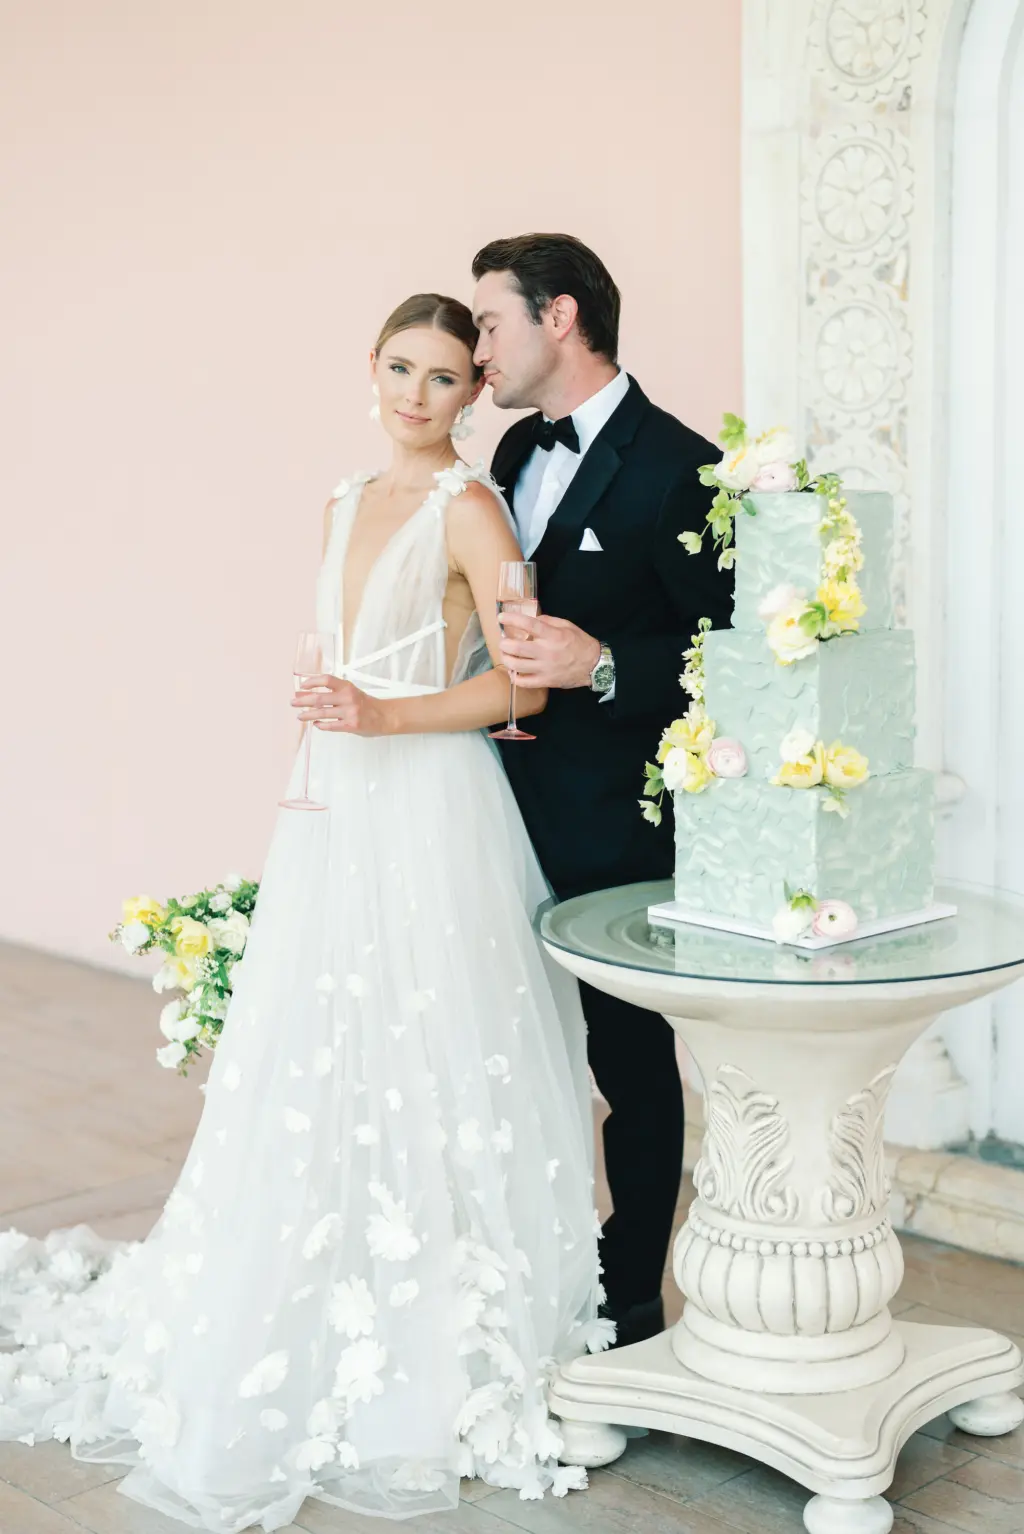 Whimsical Square Three-Tiered Blue Textured Wedding Cake with White and Yellow Rose Accents | Sarasota Photographer Amber Yonker Photography | White Tulle Deep V Neckline, A-Line Marchesa Italian Wedding Dress with Floral Applique